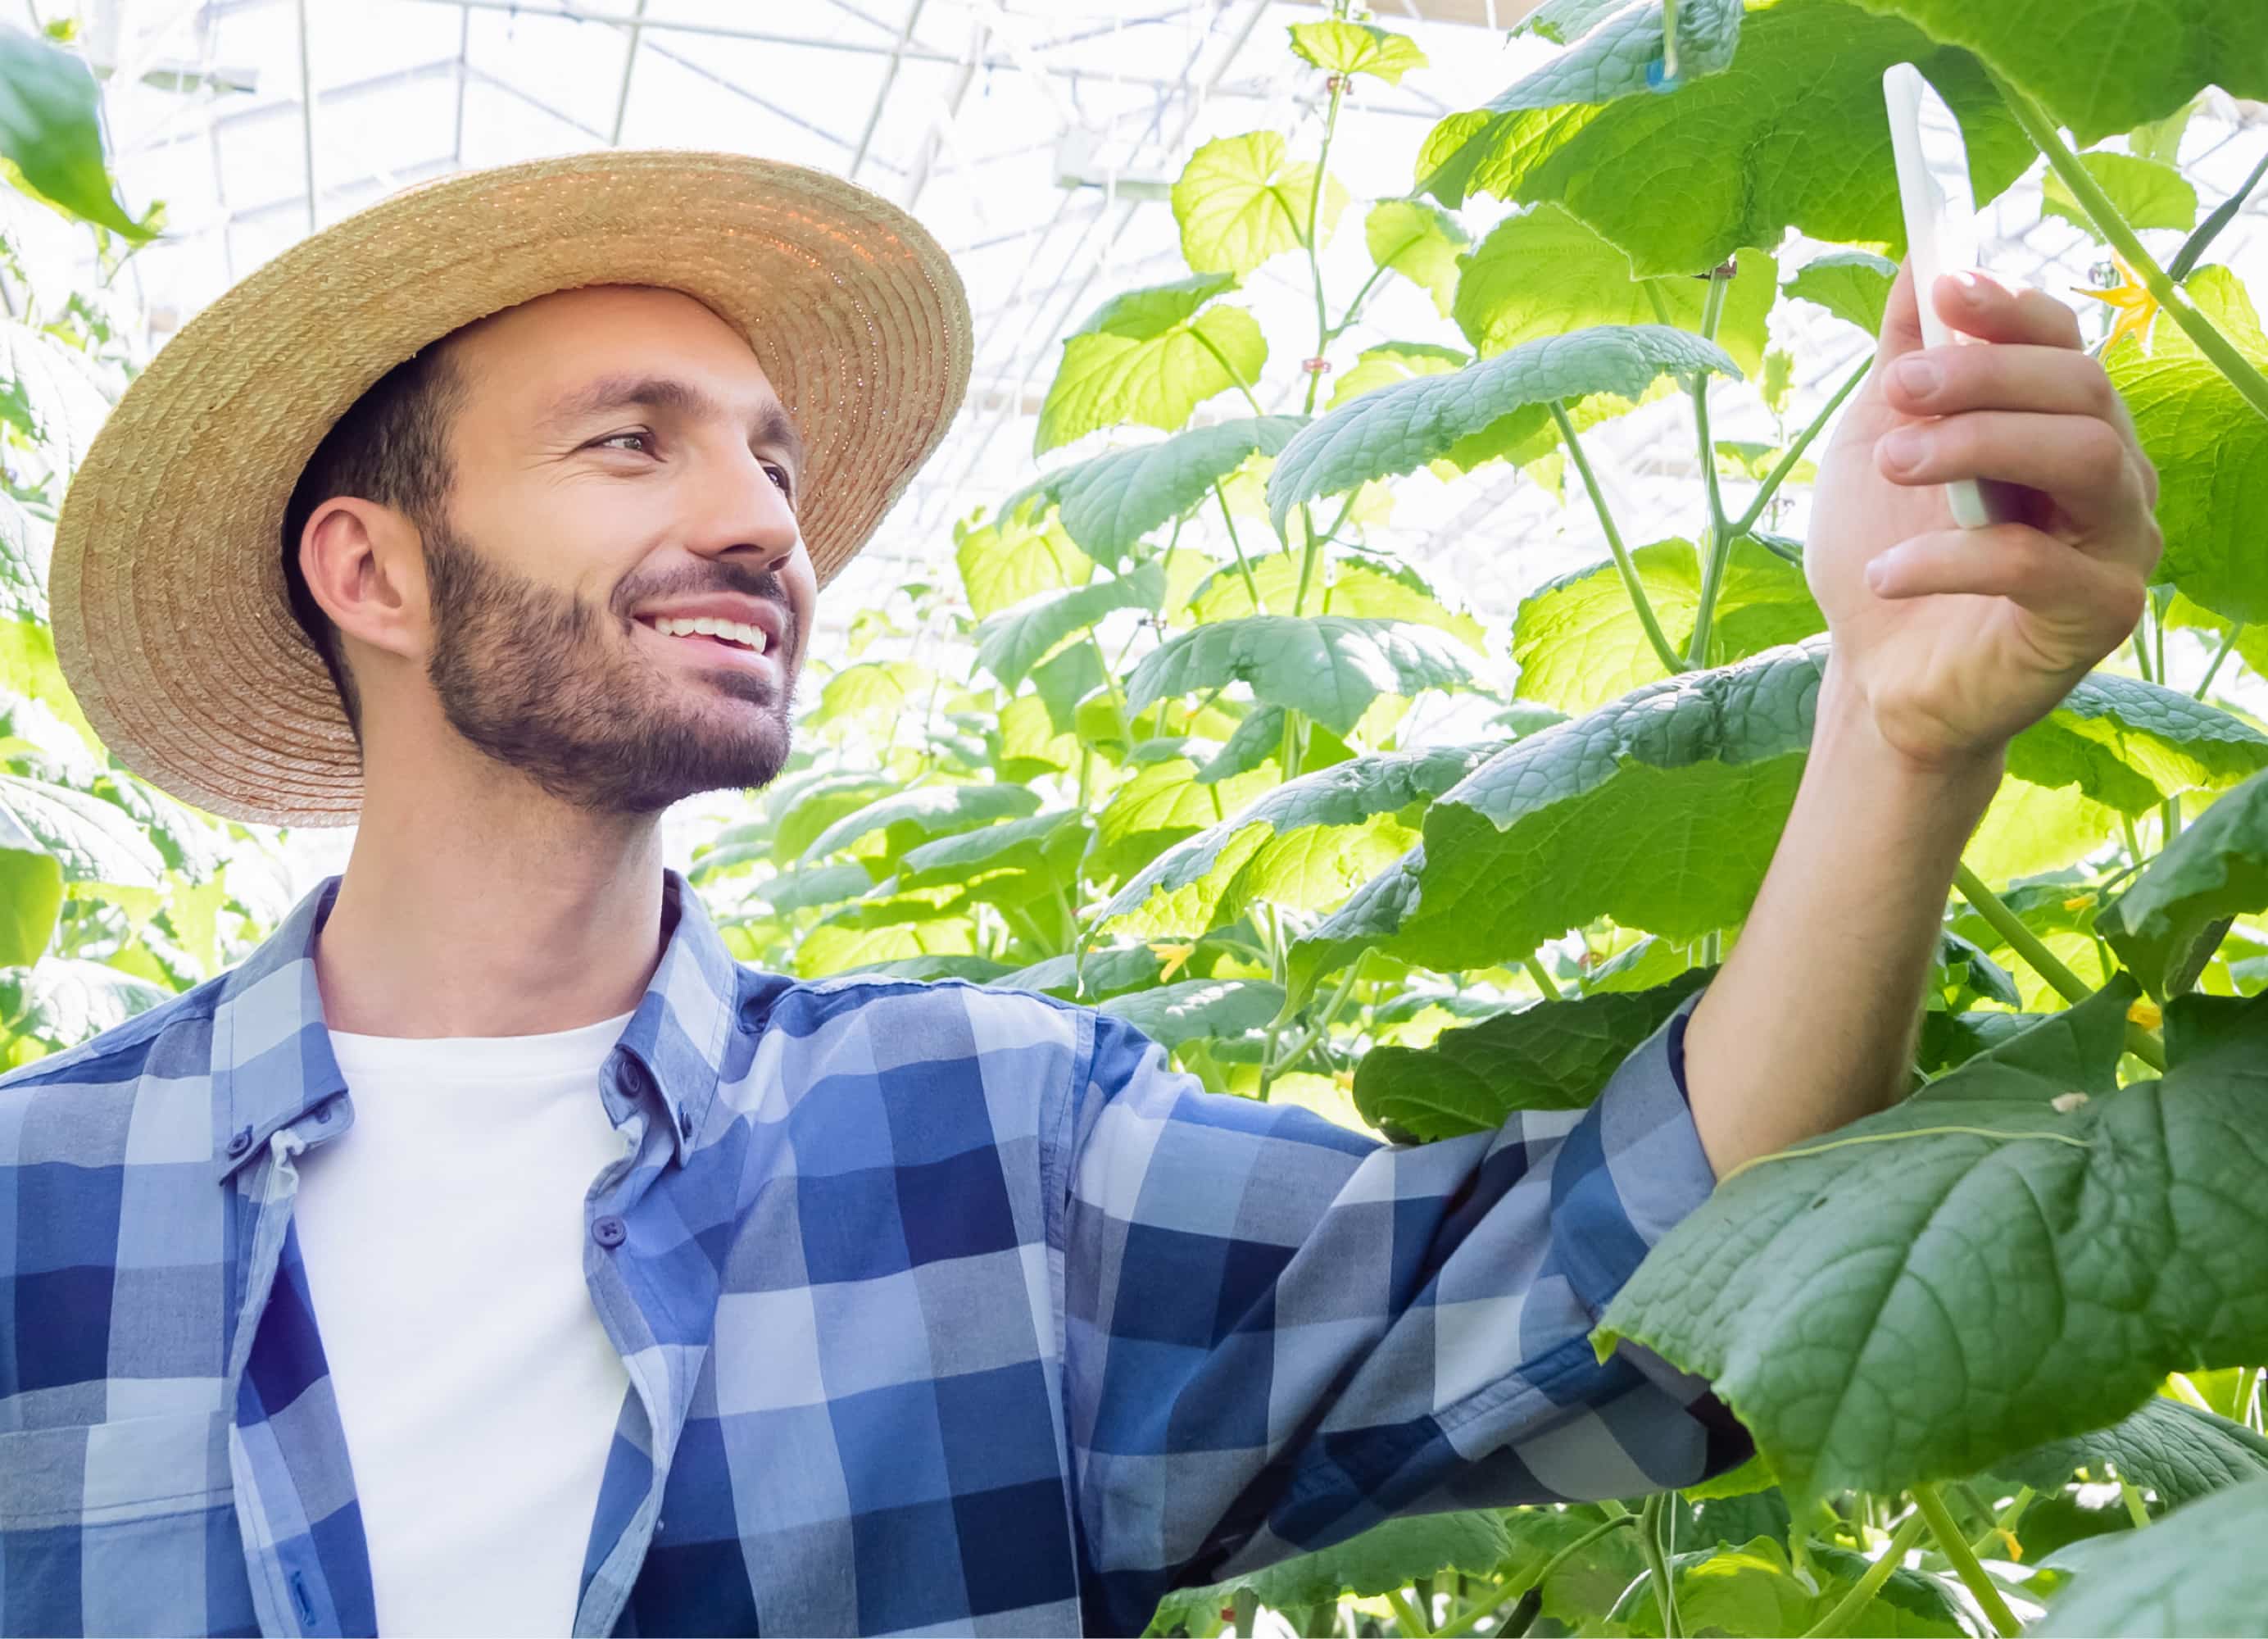 Man standing in greenhouse surrounded by lush green plants smiling at phone in hand.